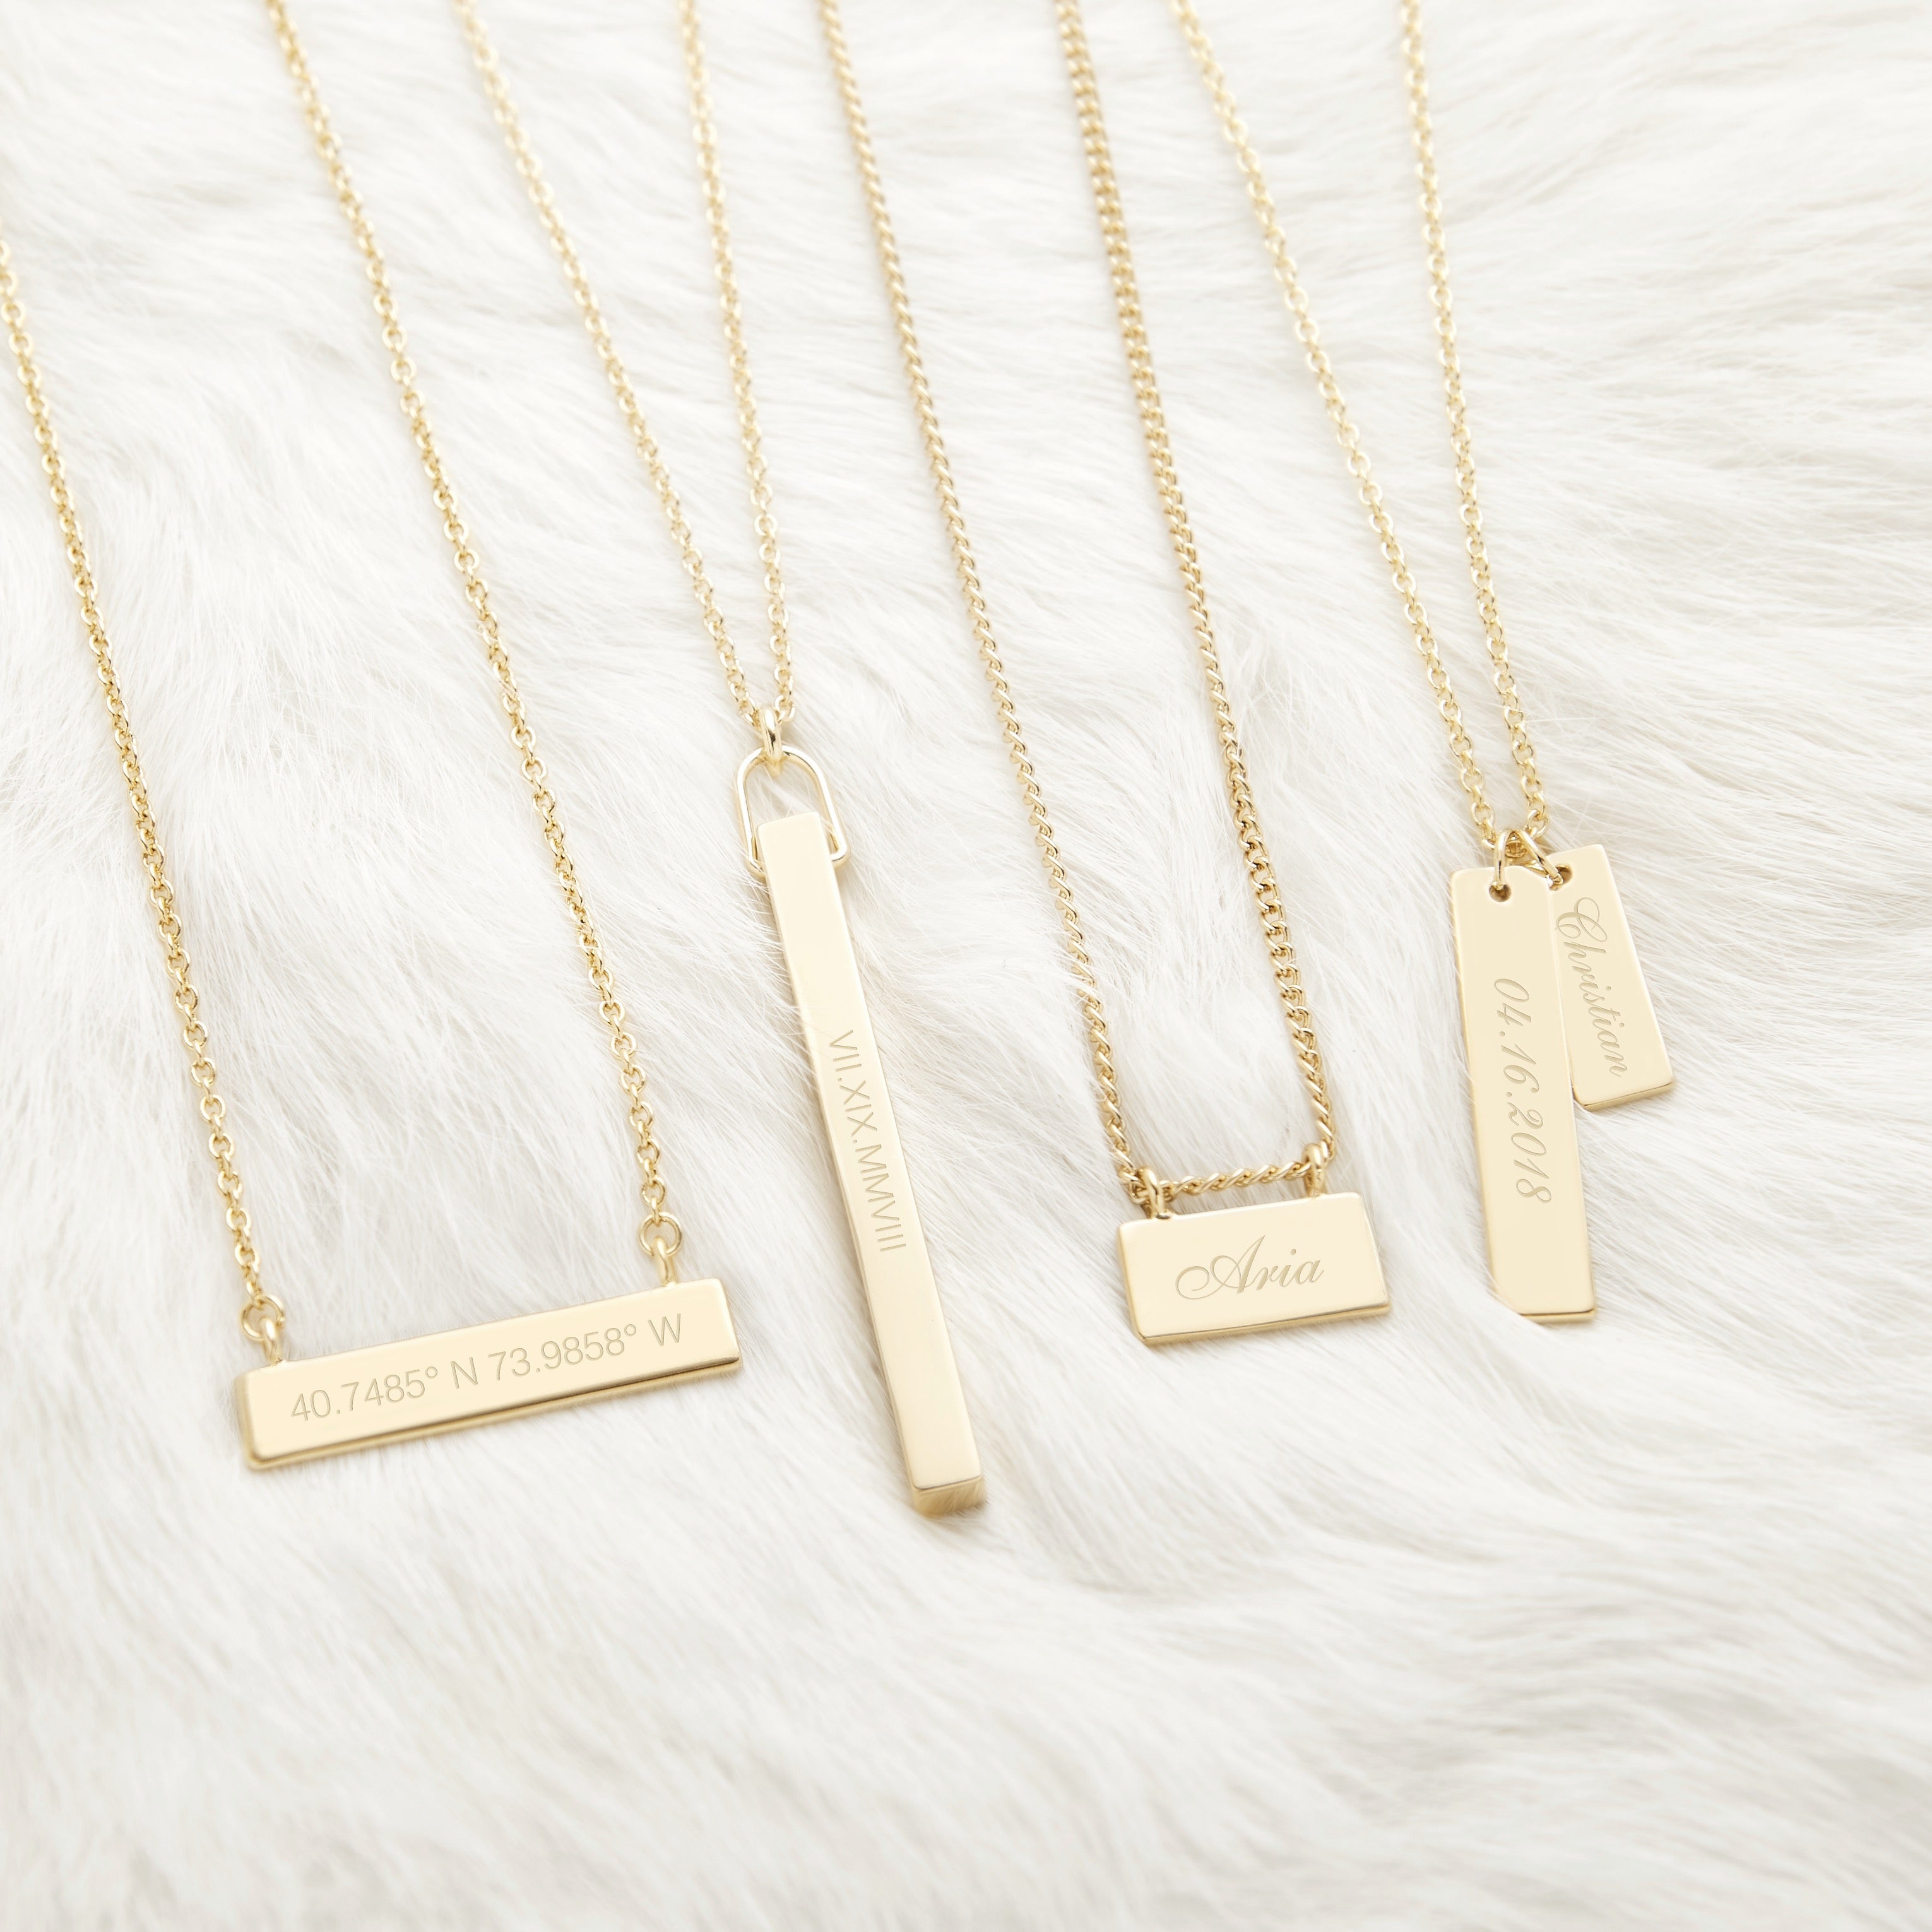 Buy Dreamdecor Custom Bar Necklace Engraved Bar Pendant Necklace  Personalized Horizontal Bar Name Necklace for Women at Amazon.in